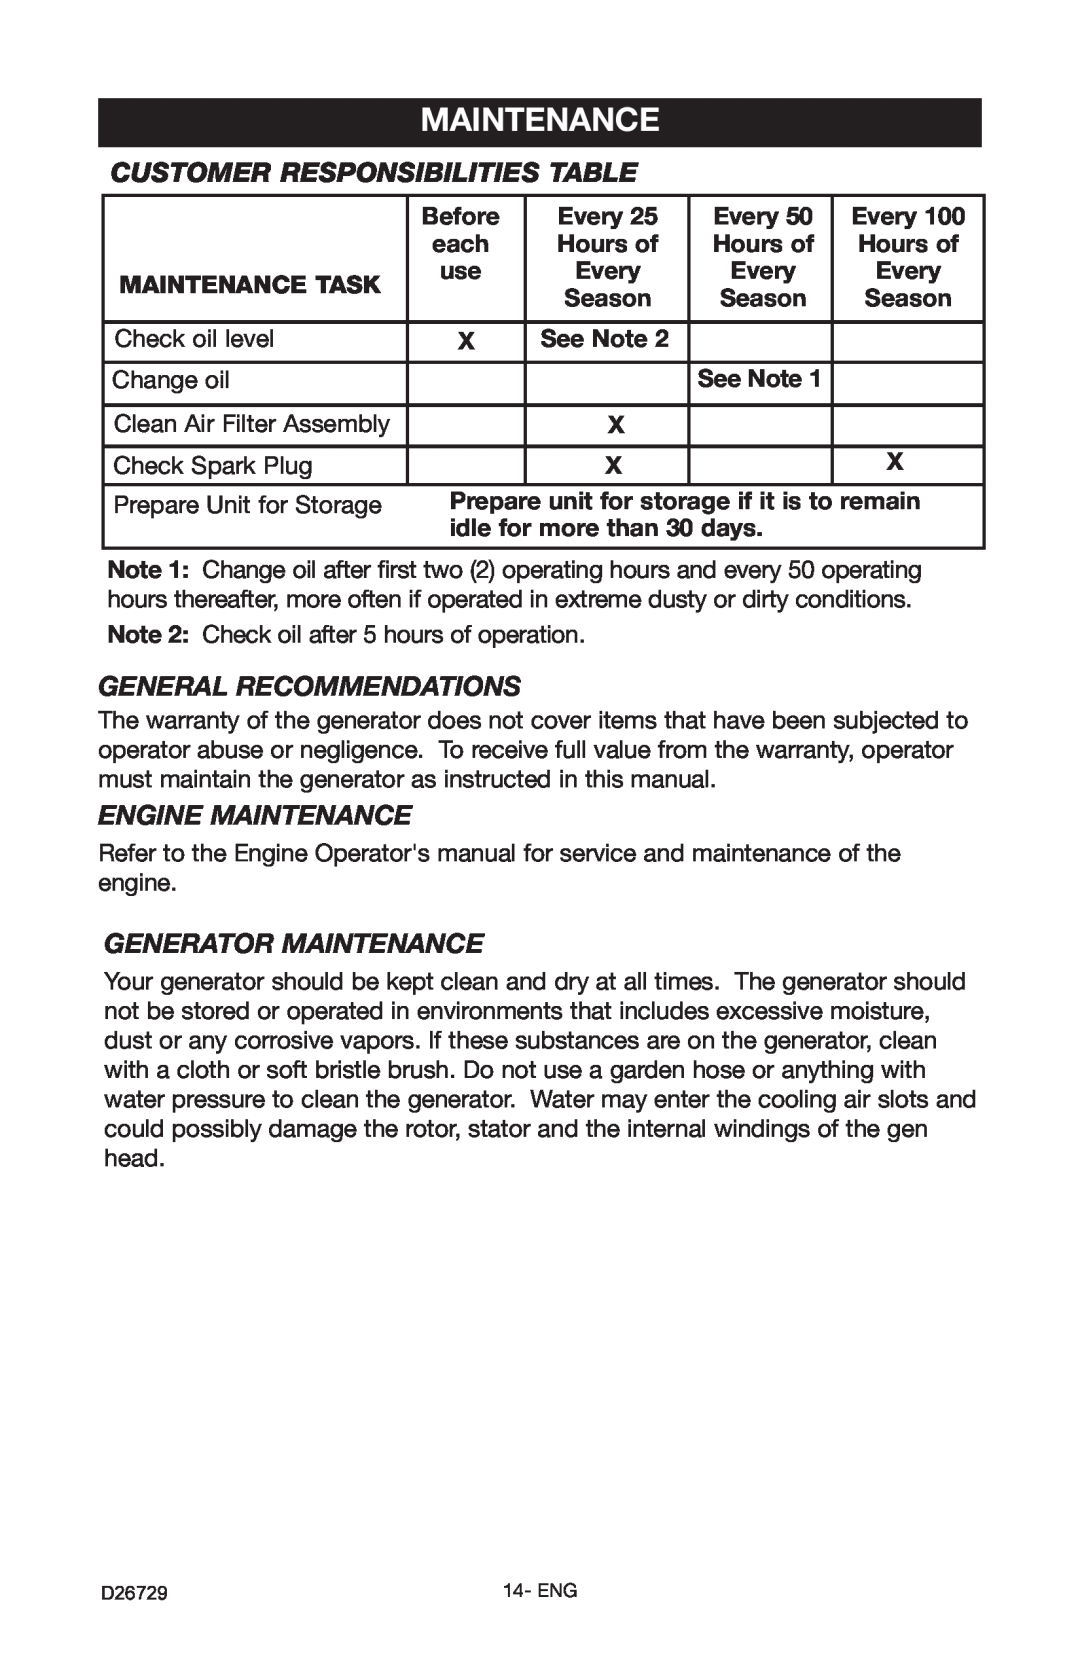 Porter-Cable D26729-028-0 Customer Responsibilities Table, General Recommendations, Engine Maintenance 